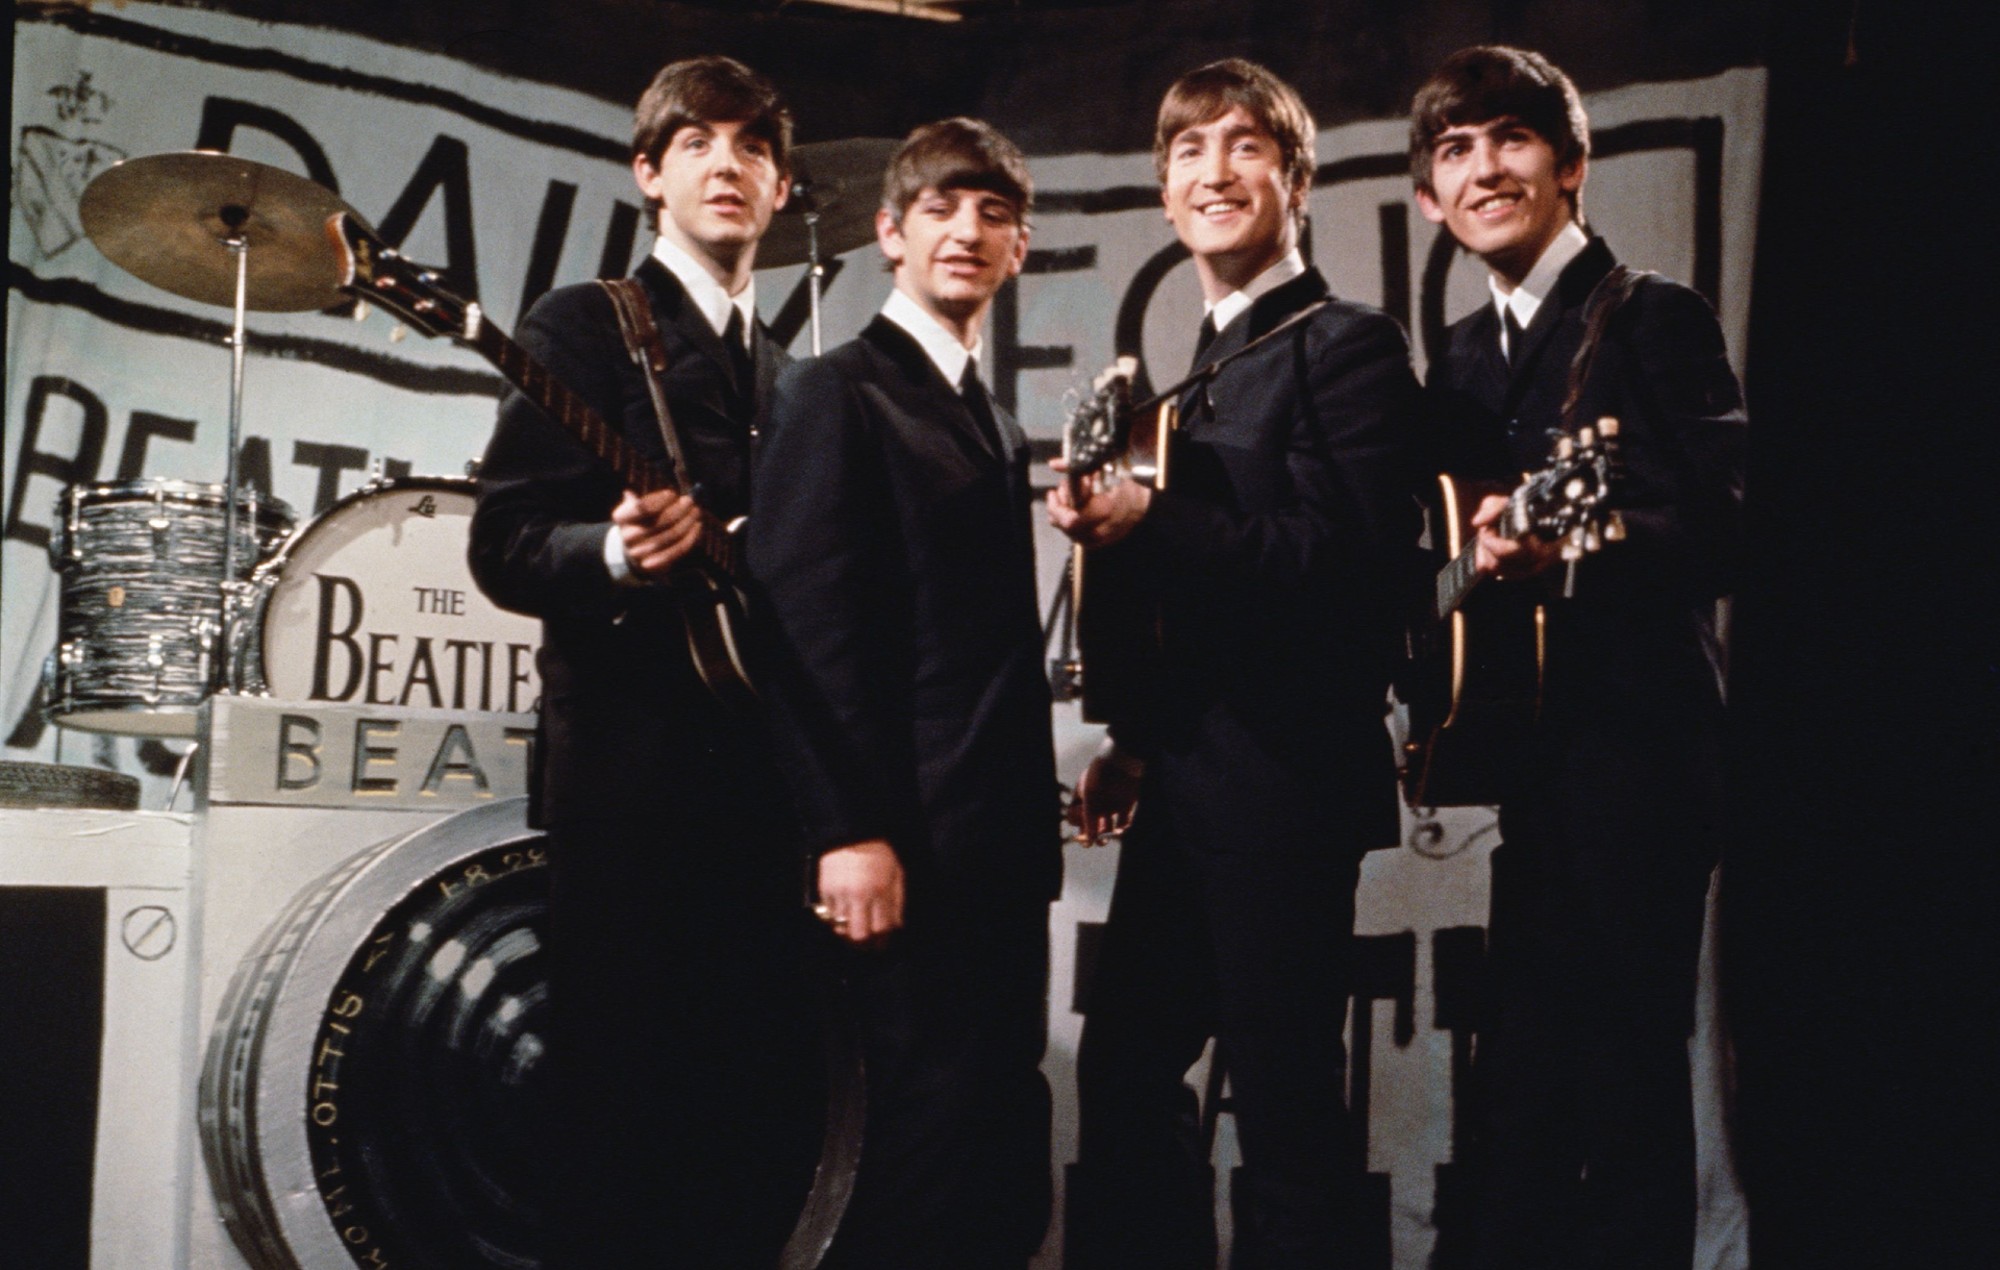 The Beatles’ ‘Now And Then’ on track to become 18th Number One single